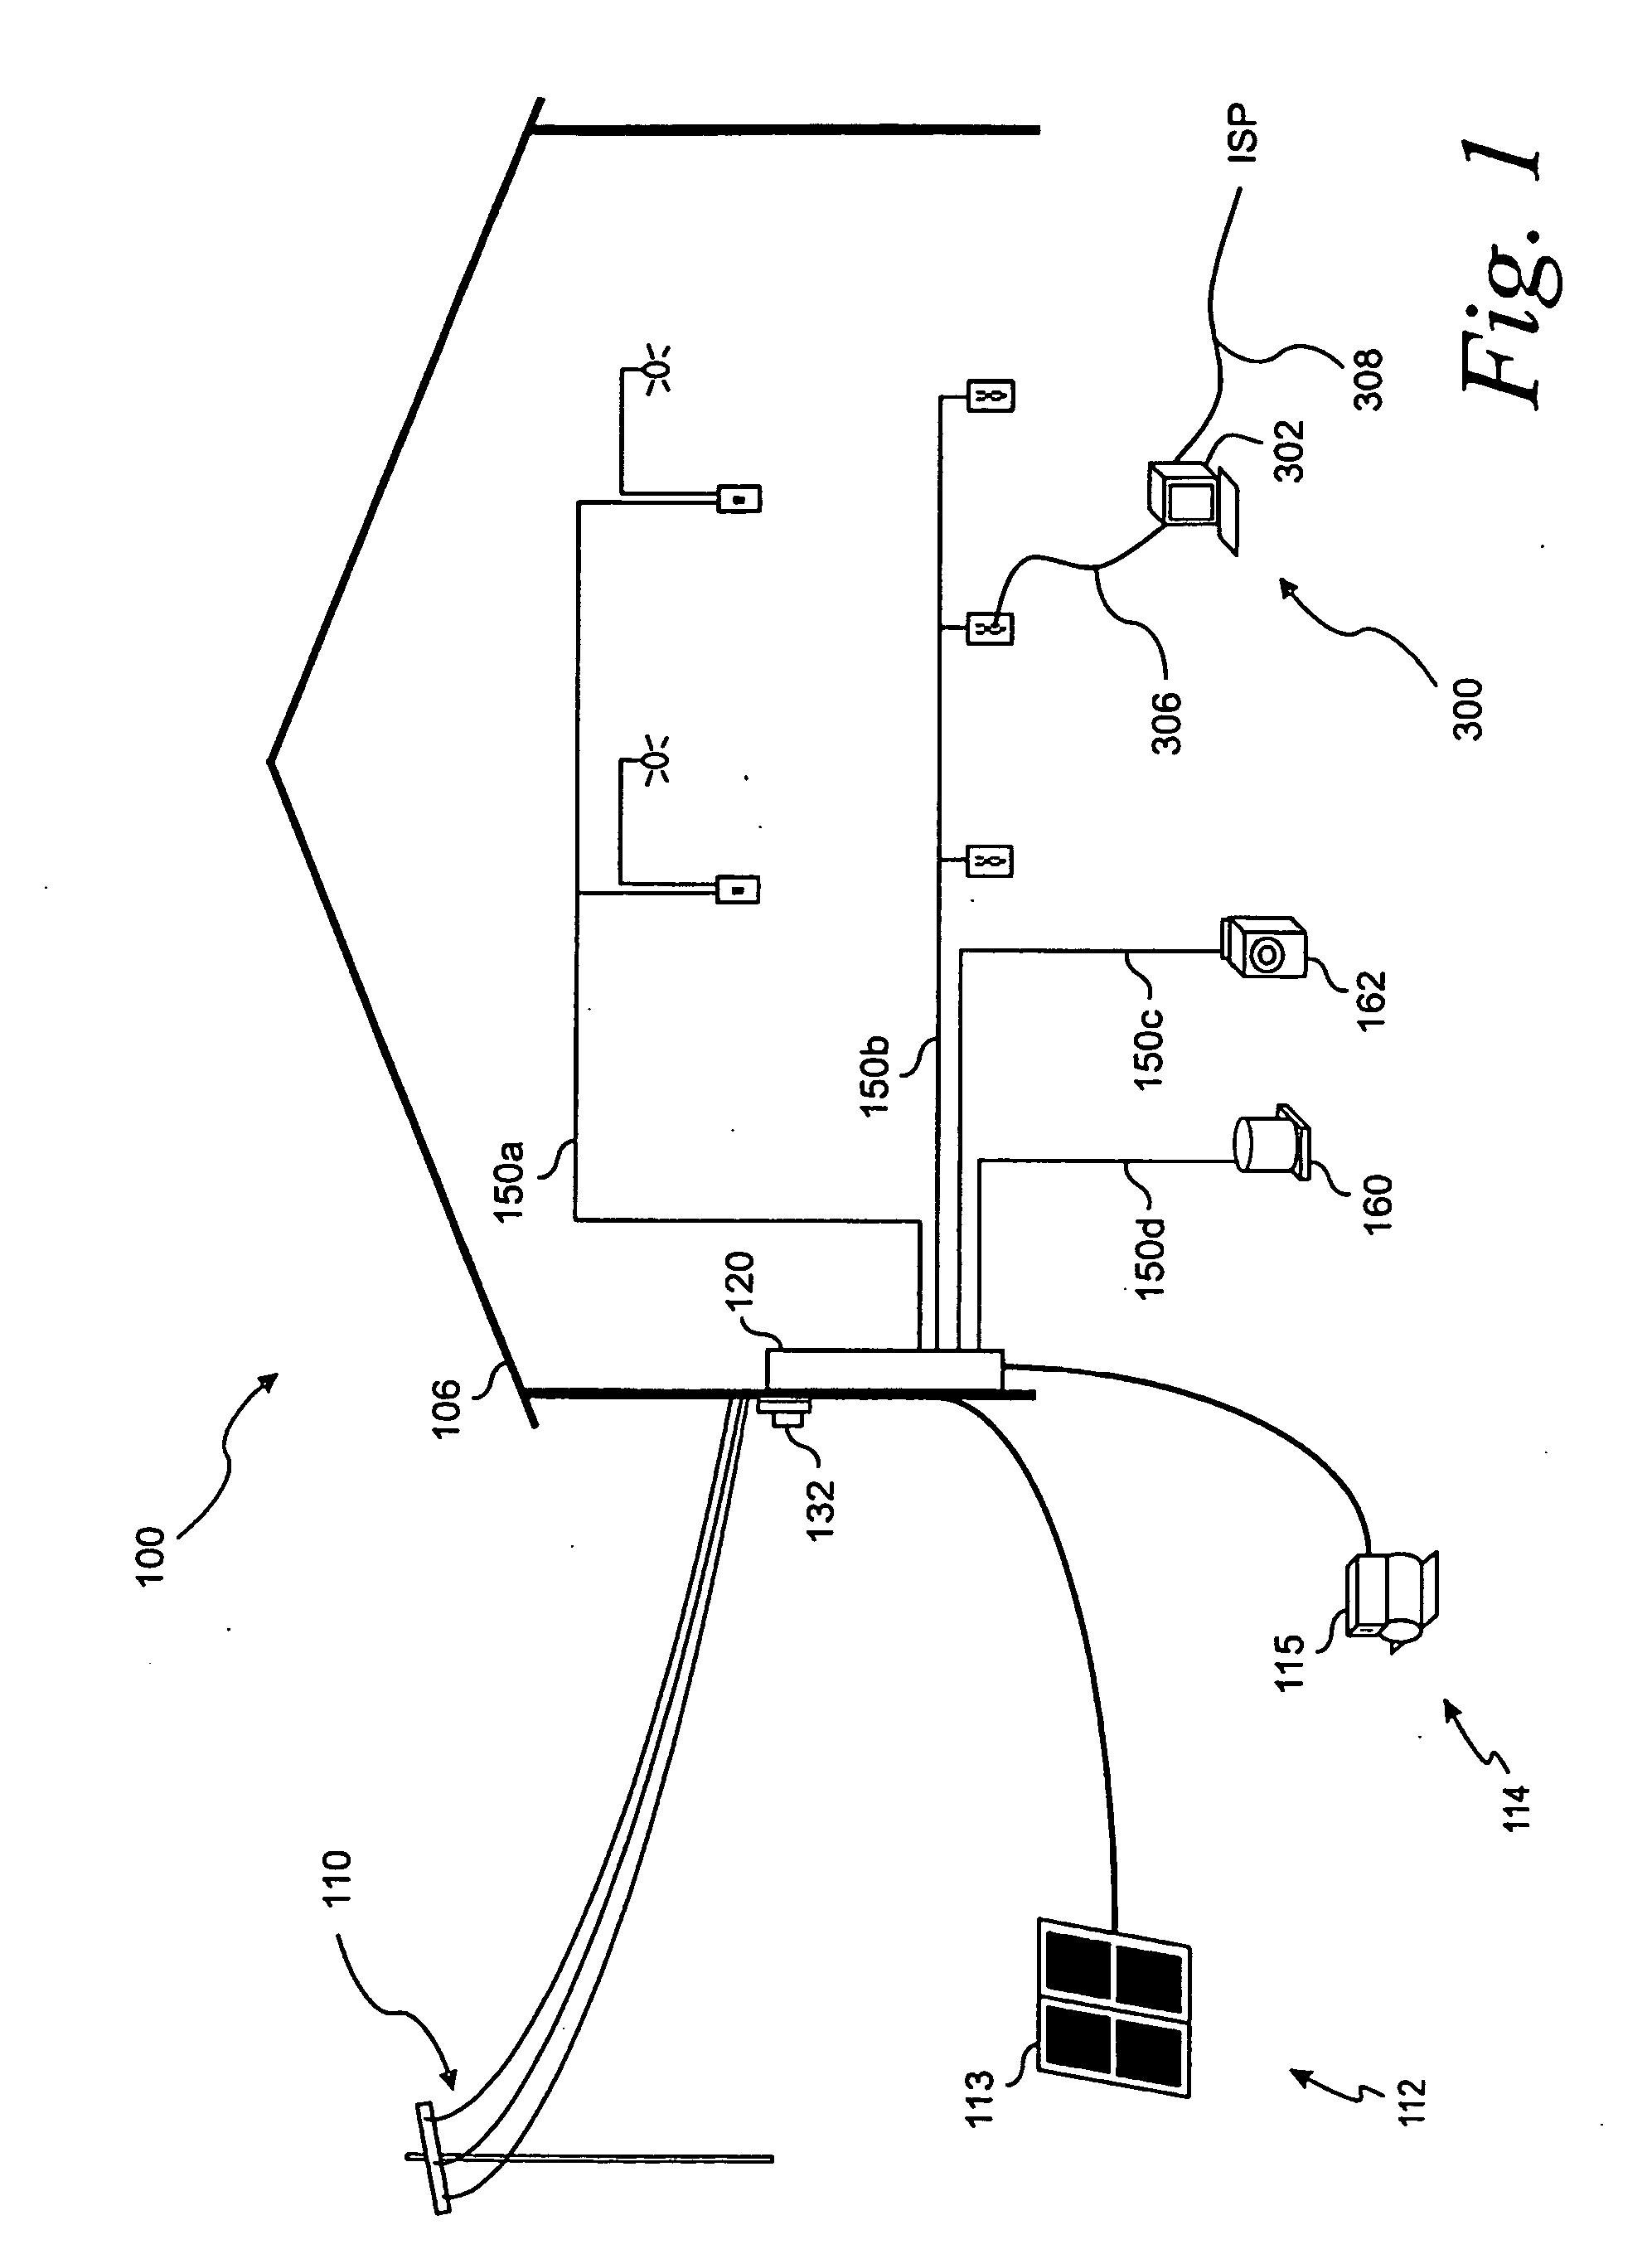 Method for adaptively managing a plurality of loads